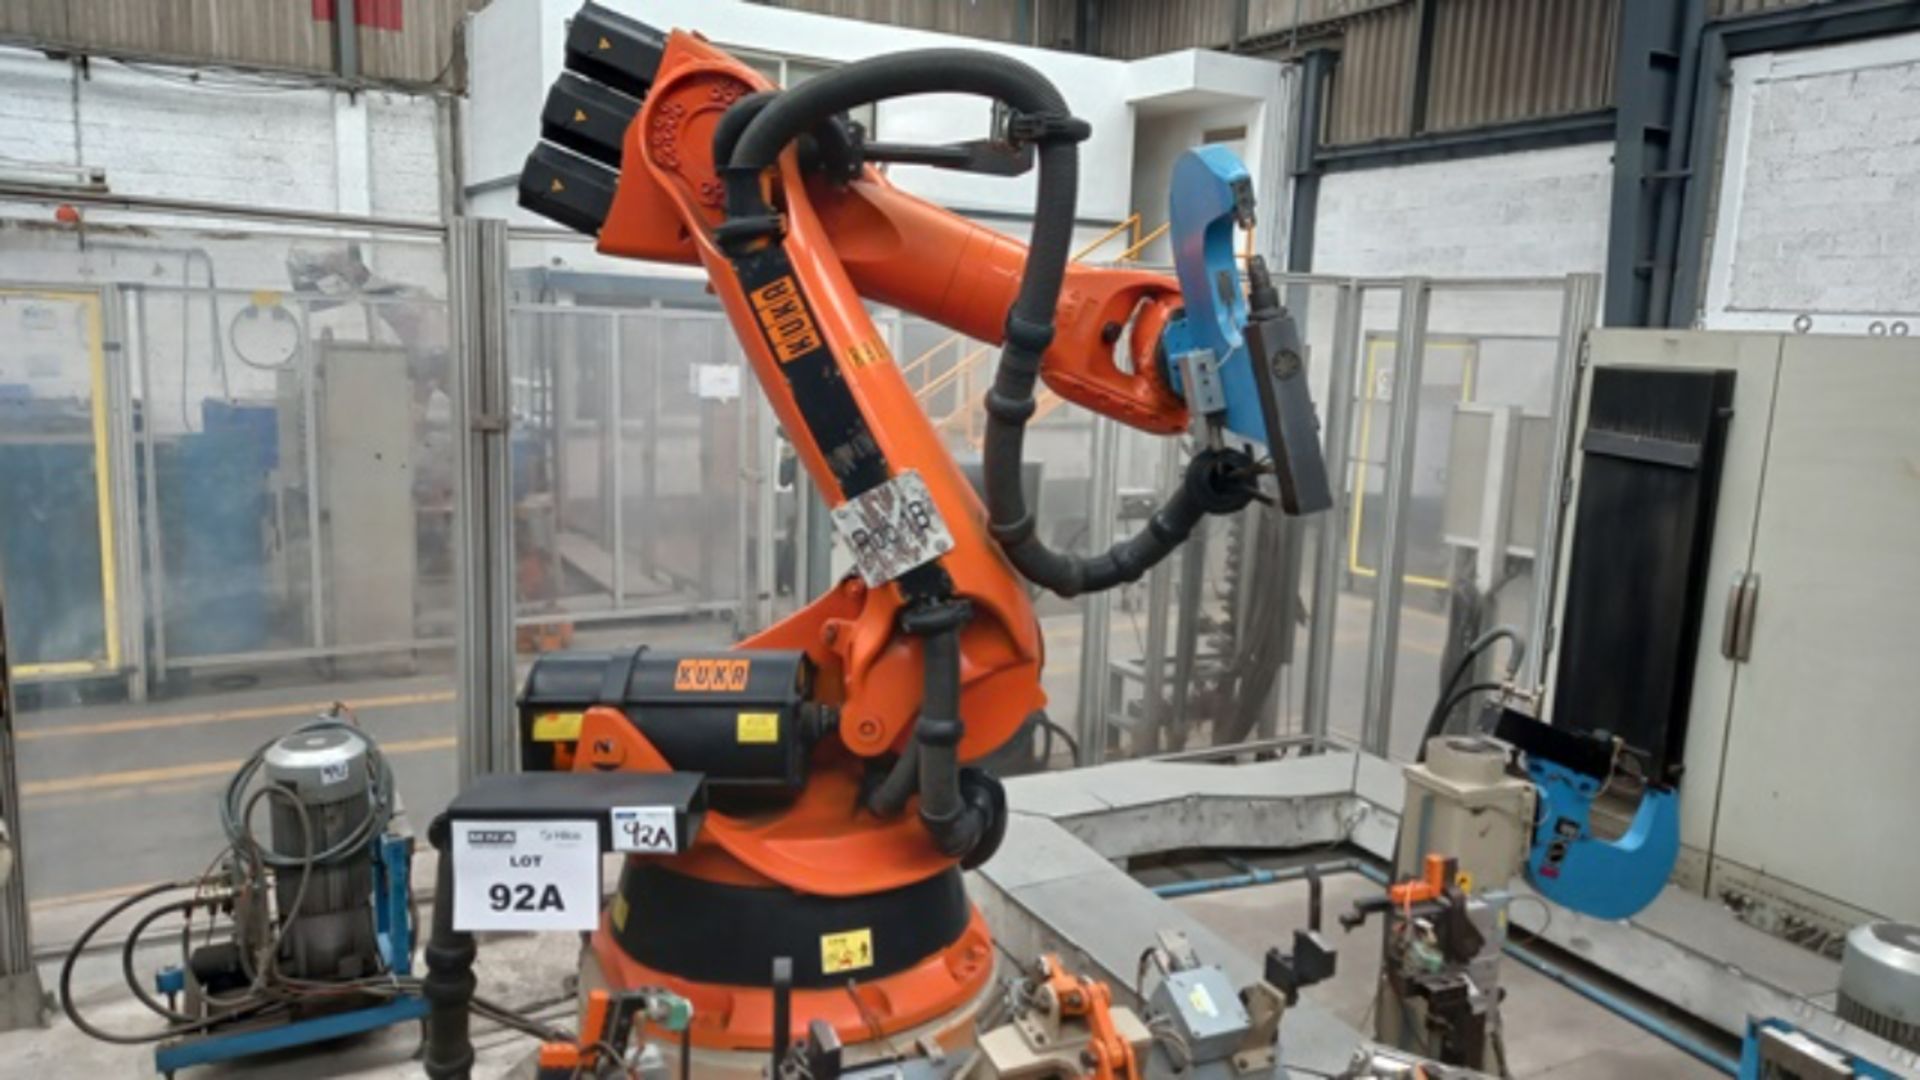 Kuka KR-210 Robot, Maximum Reach: 2,700 mm, Rated Payload: 210 Kg, with Robot Controller, New 2003 - Image 3 of 4